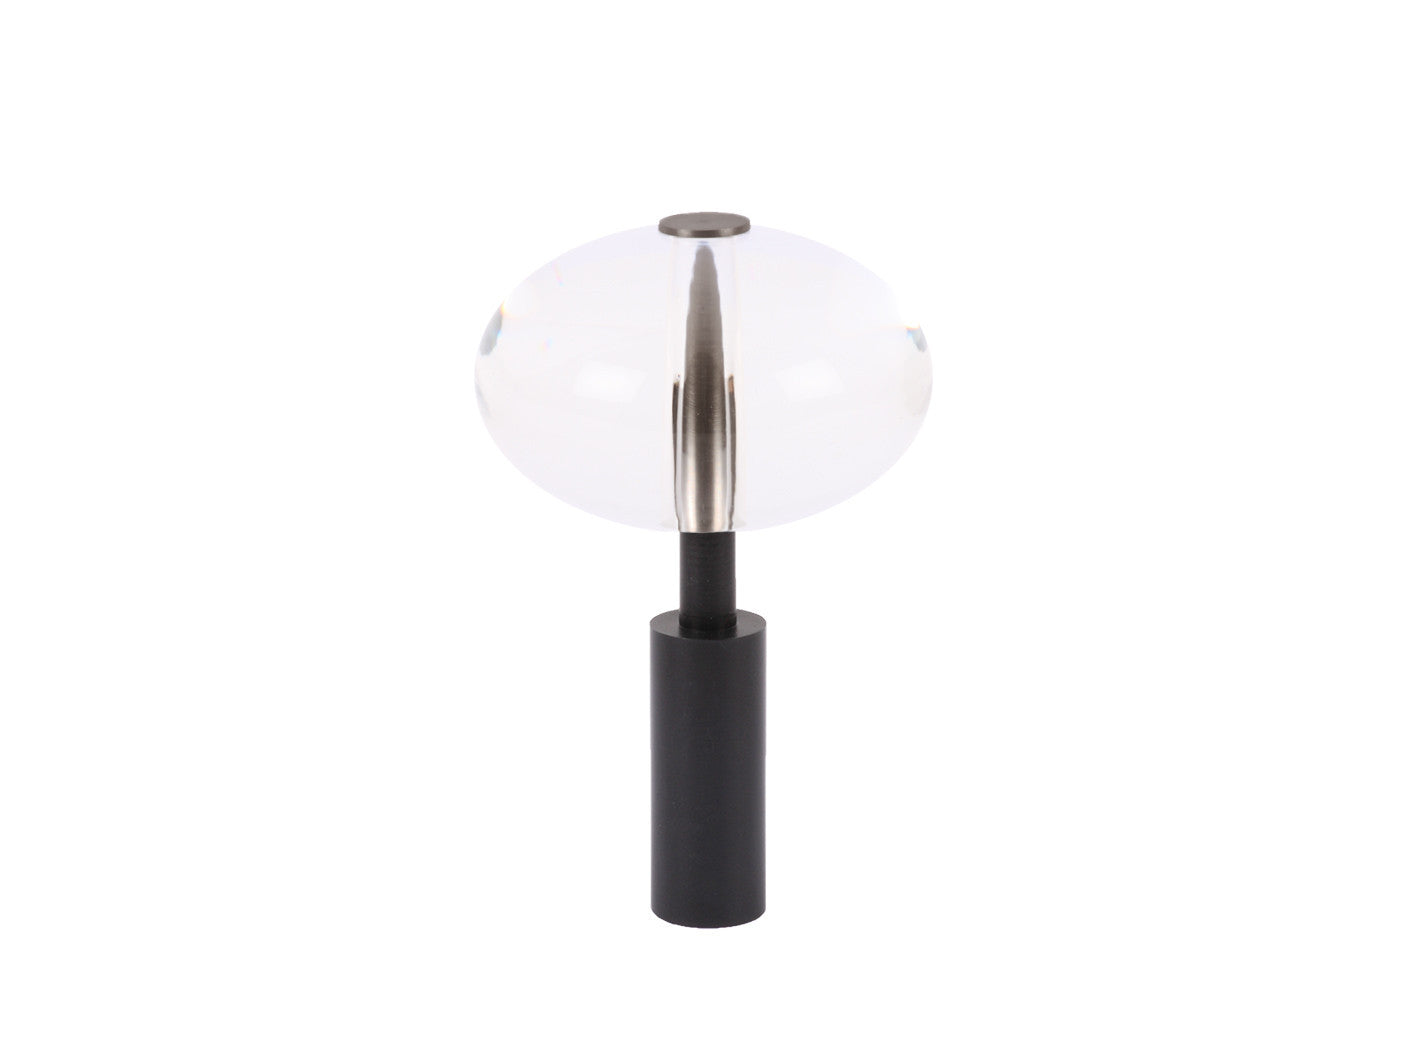 Acrylic ellipse finial in black for 19mm dia. curtain poles